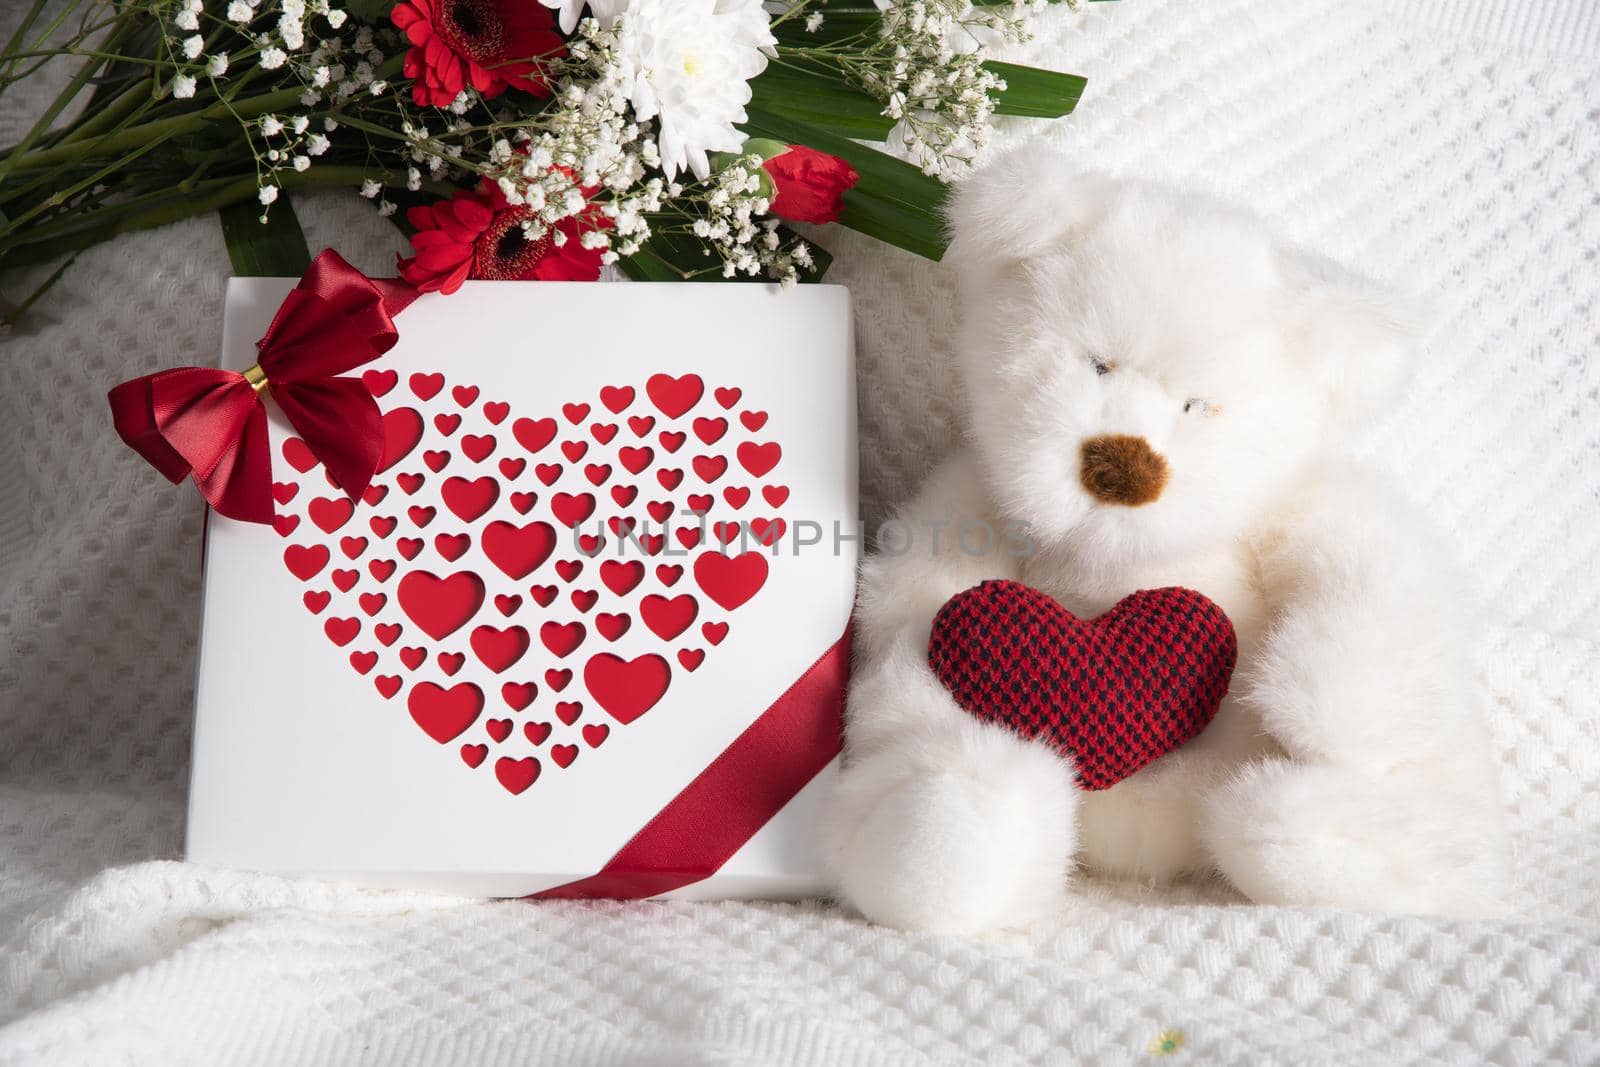 Valentine's day gift, teddy bear with a heart, a box of pralines and a bouquet of flowers on the bed early in the morning. High quality photo